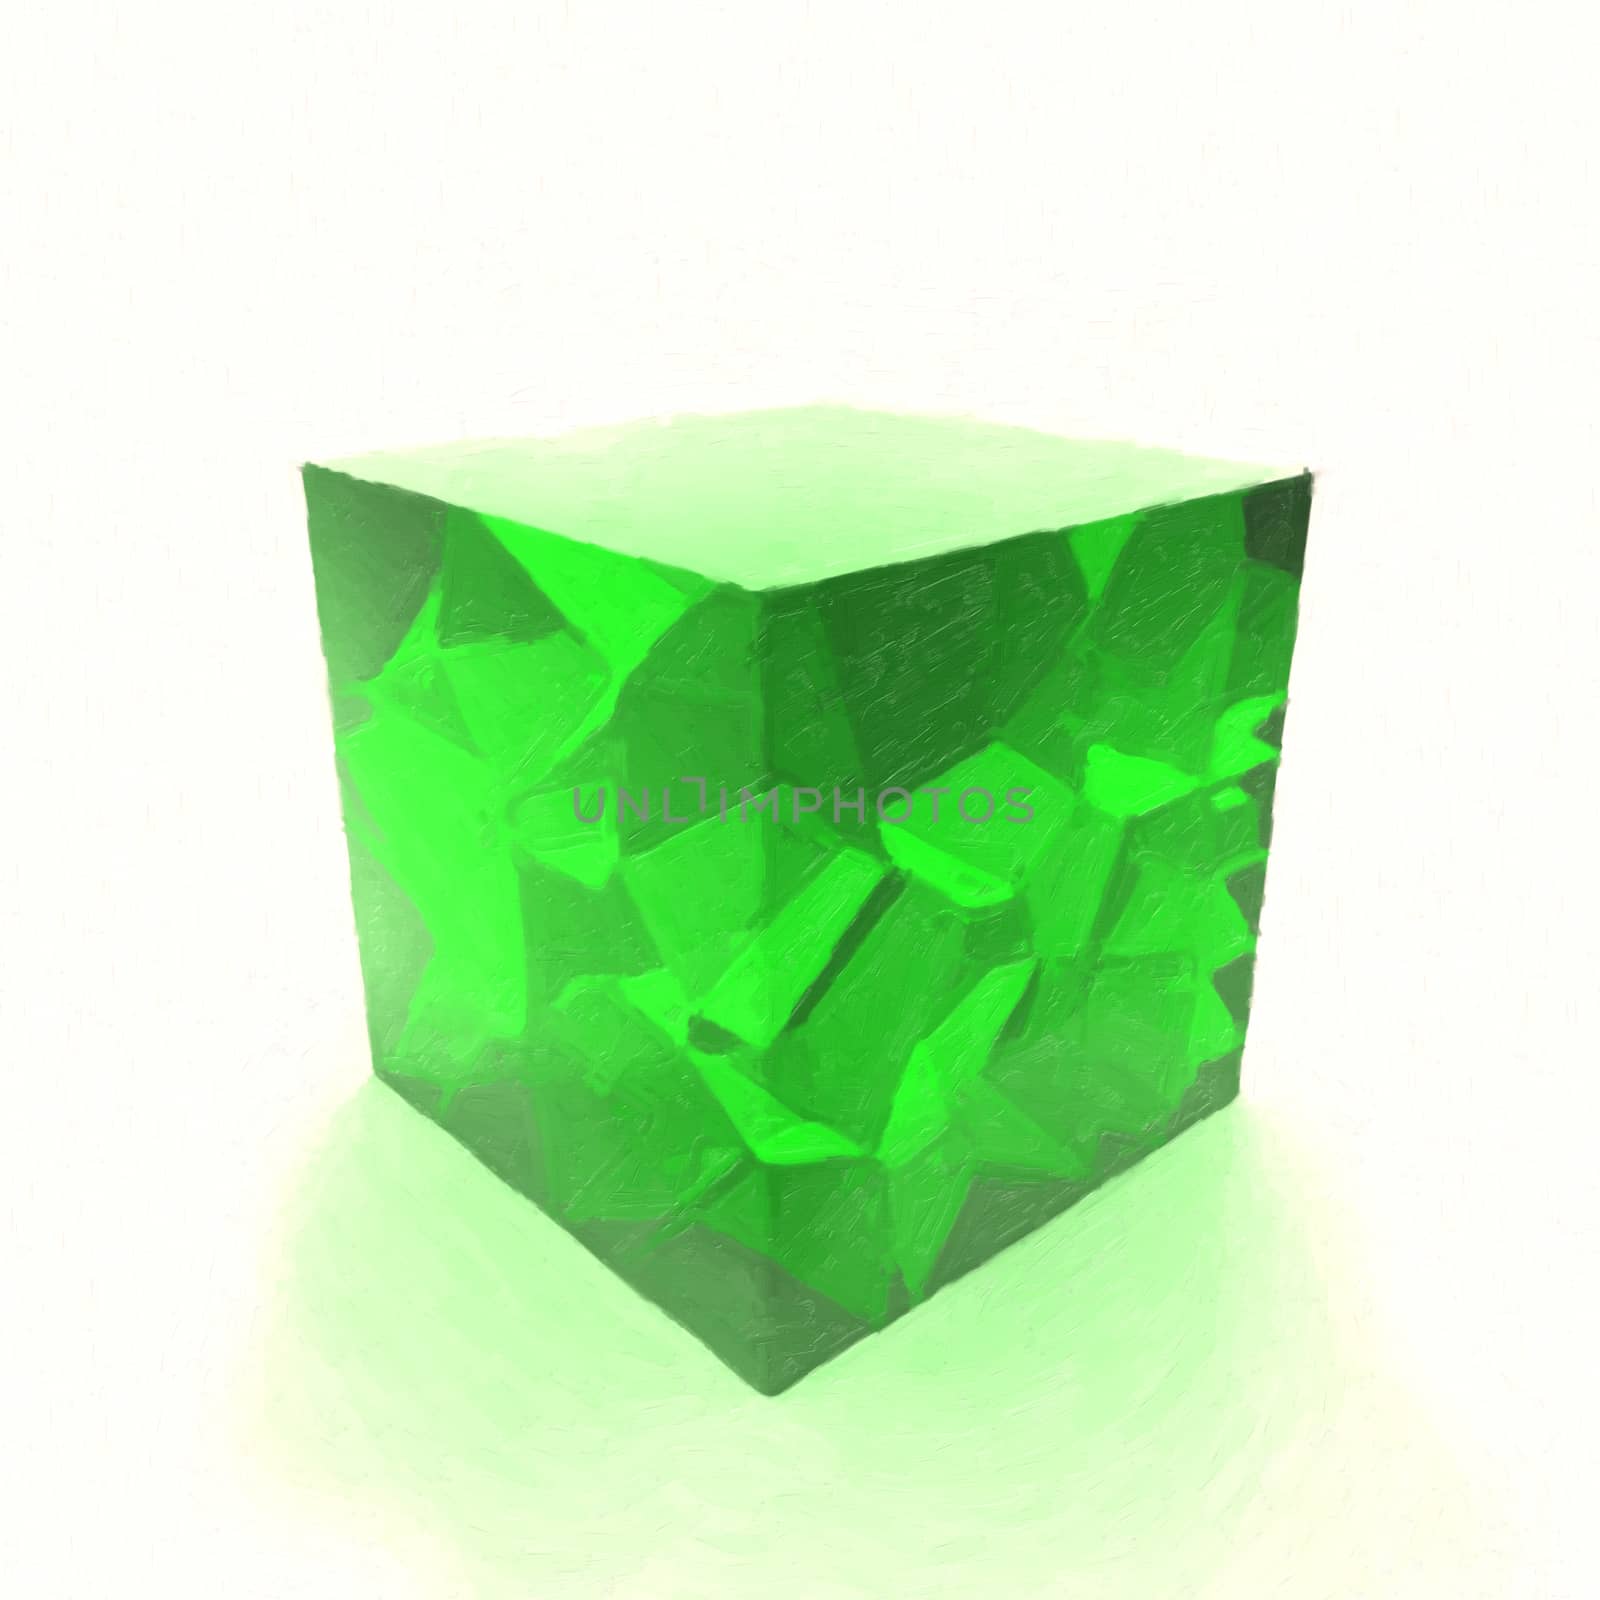 Green glass cube oil painted. 3d illustration.